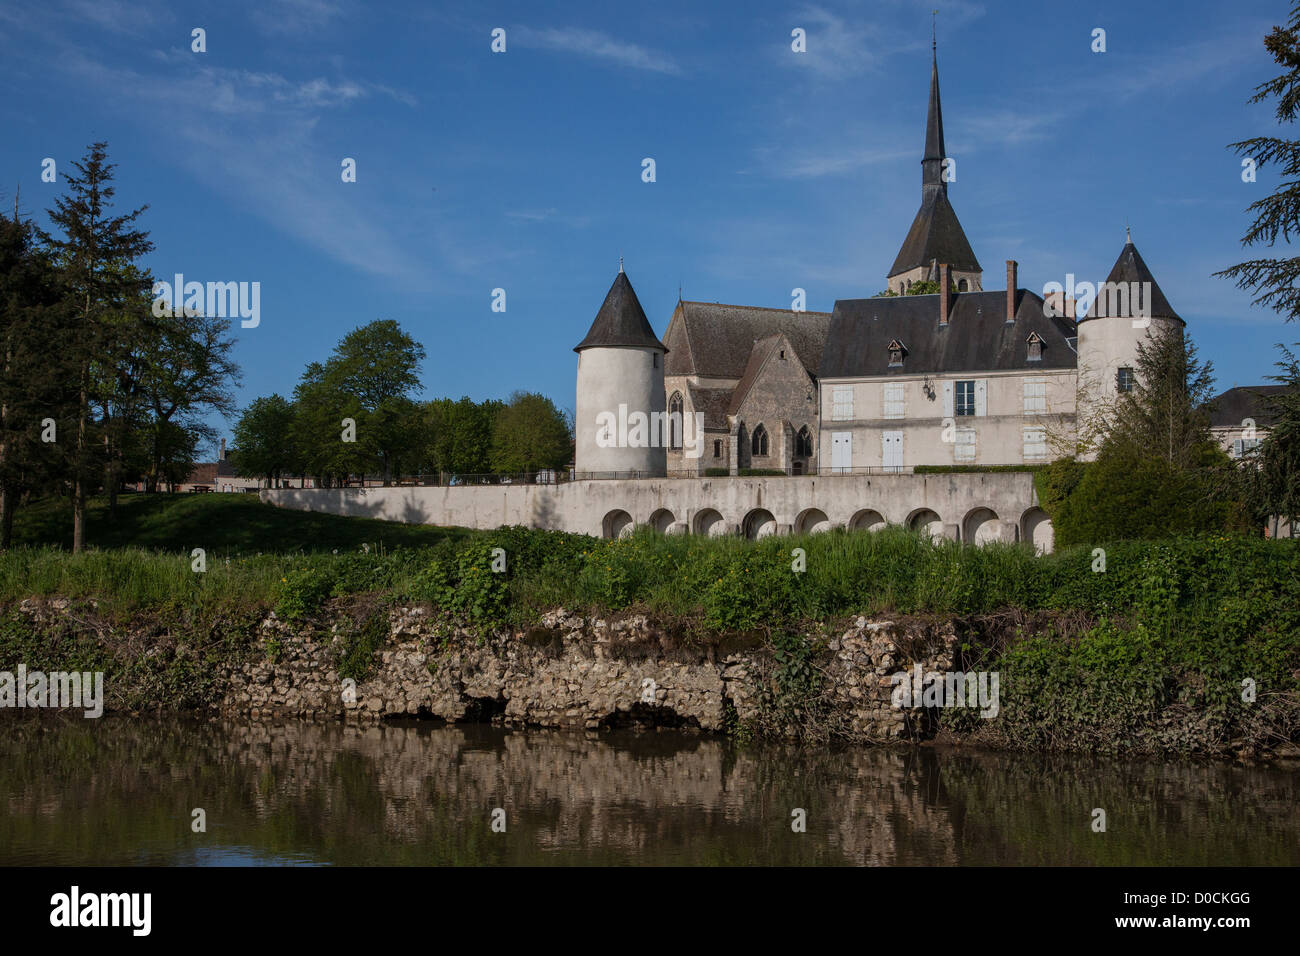 CHATEAU SAINT-MAUR BUILT BETWEEN 1776-1778 SAINT-ANDRE CHURCH BUILT IN 13TH CENTURY EXTENDED IN 15TH ON BANKS GRANDE SAULDRE Stock Photo